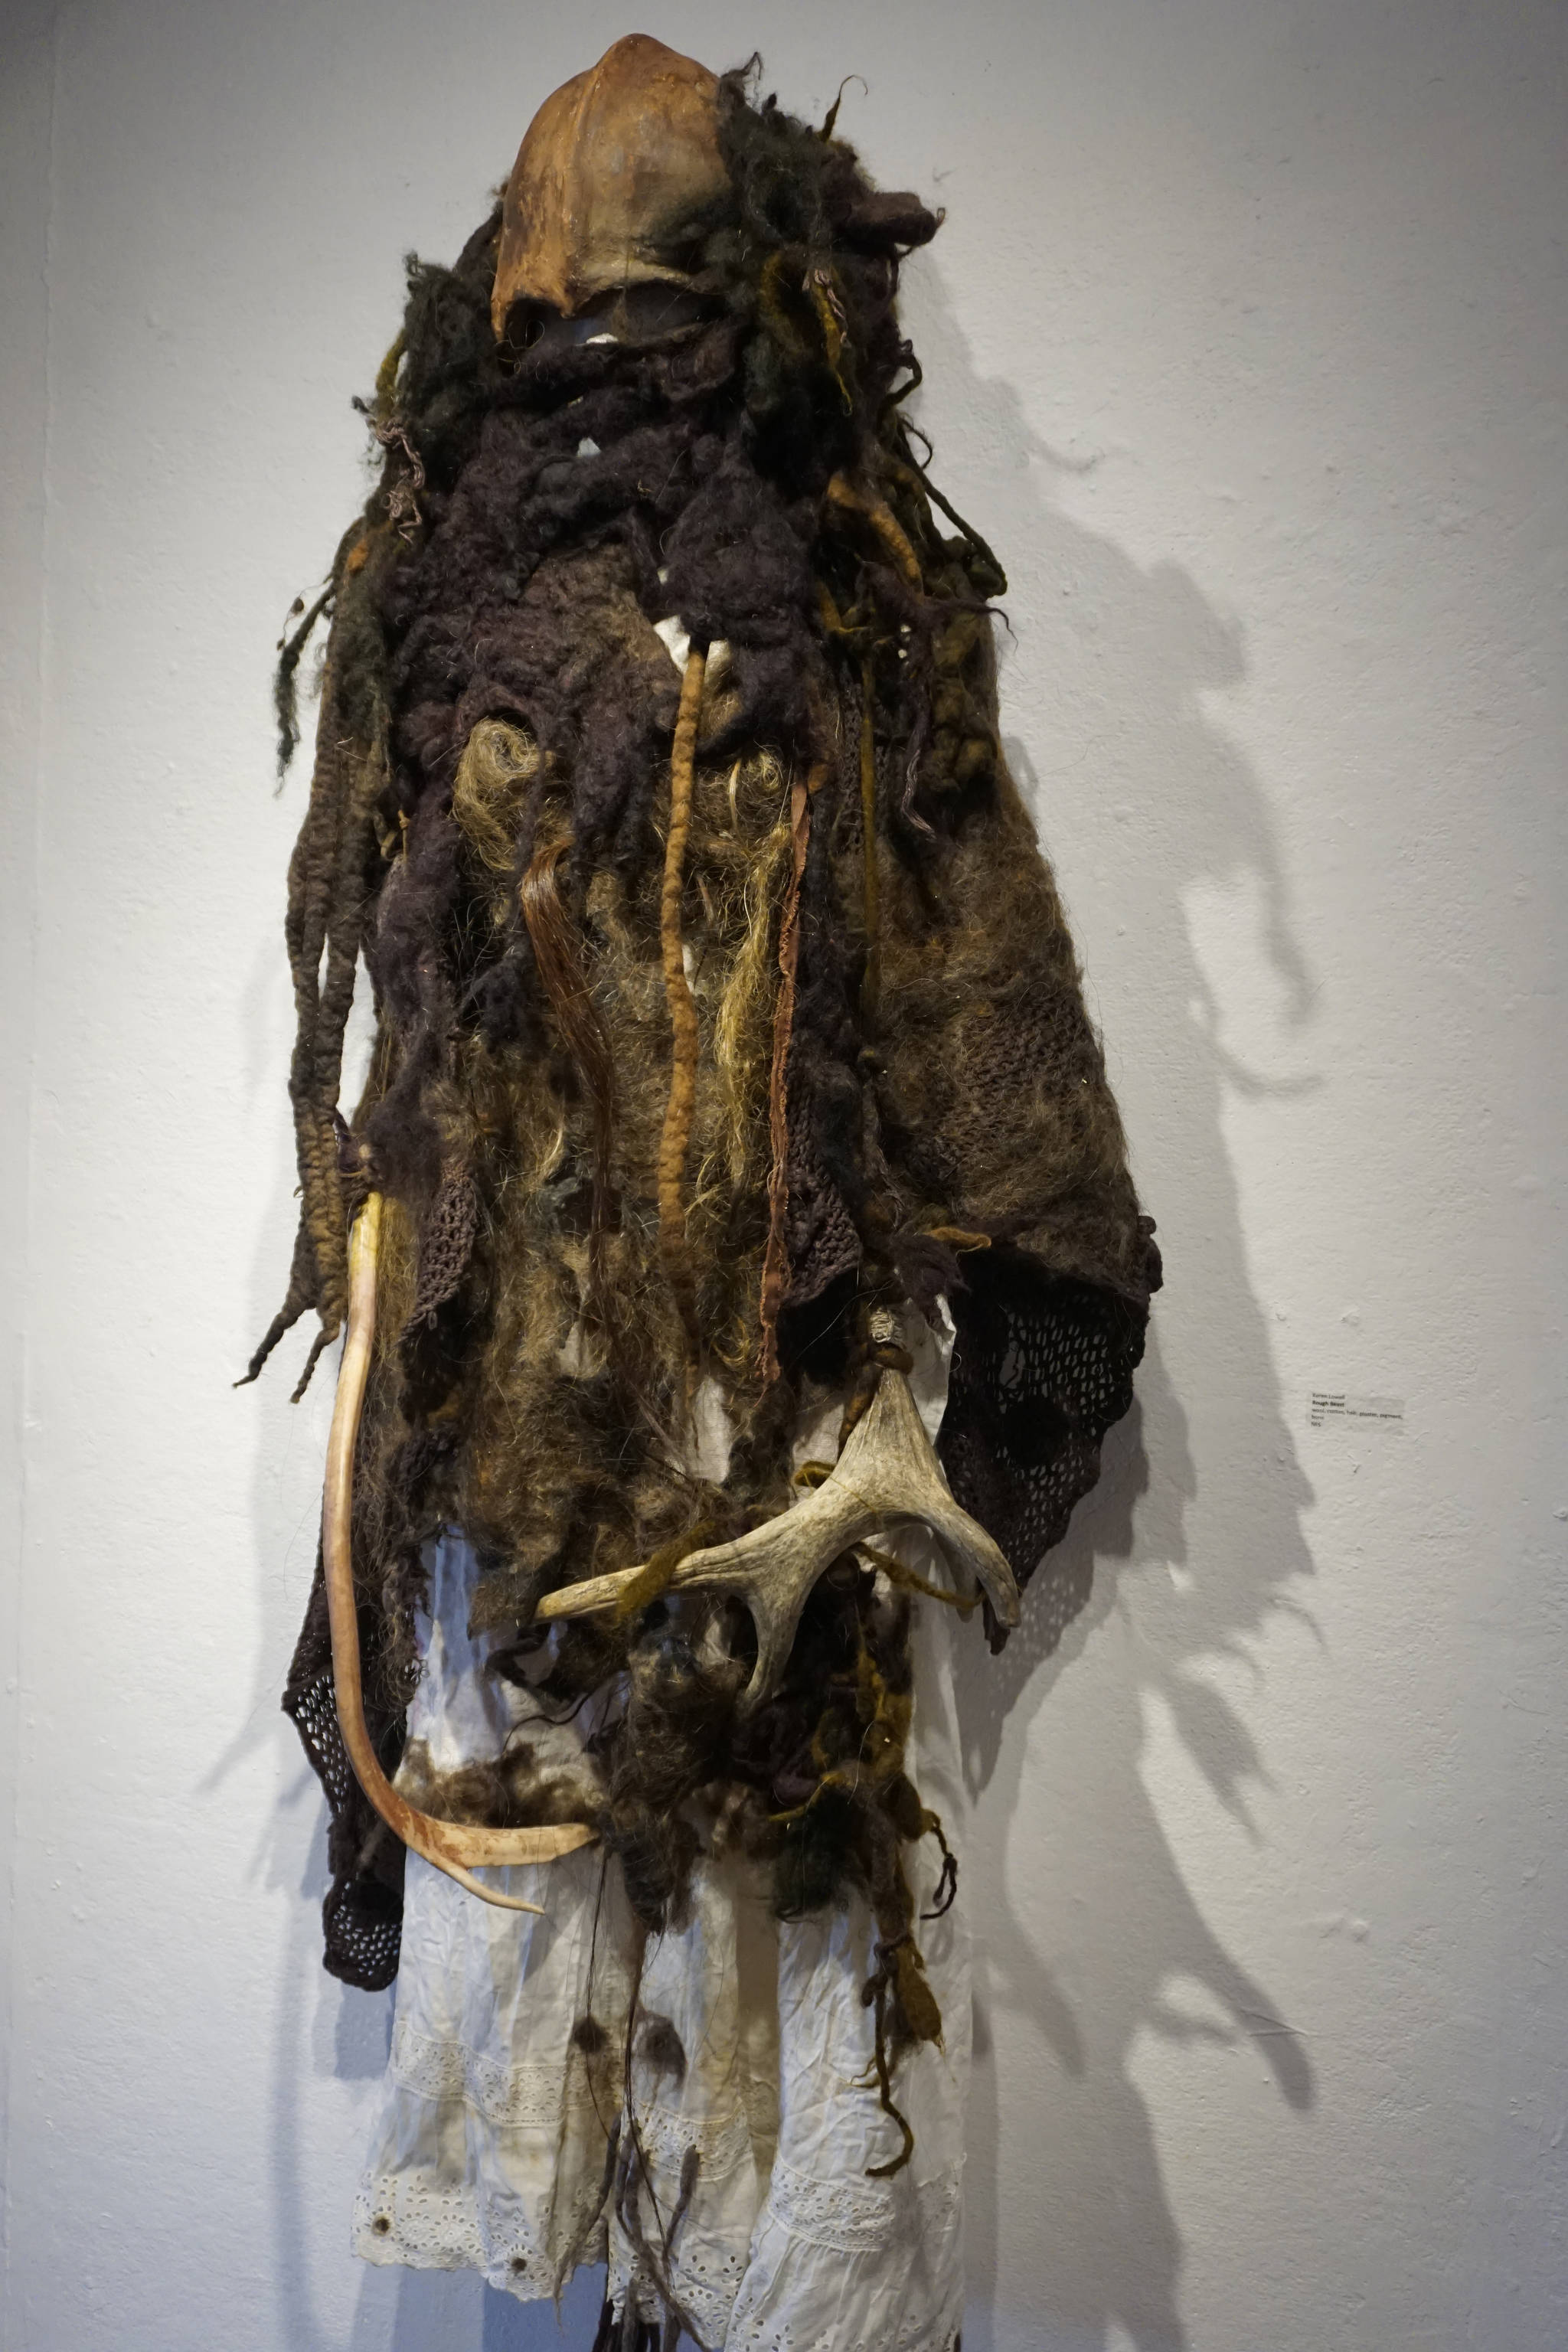 Keren Lowell’s “Rough Beast,” part of her show at Bunnell Street Arts Center as seen at the First Friday, Oct. 6, 2018, opening in Homer, Alaska. The title refers to a line in Willam Butler Yeats’ poem “Second Coming”: “And what rough beast, its hour come round at last / slouches its way to Bethlehem to be born?” Many of Lowell’s garments have poetic references. (Photo by Michael Armstrong/Homer News)